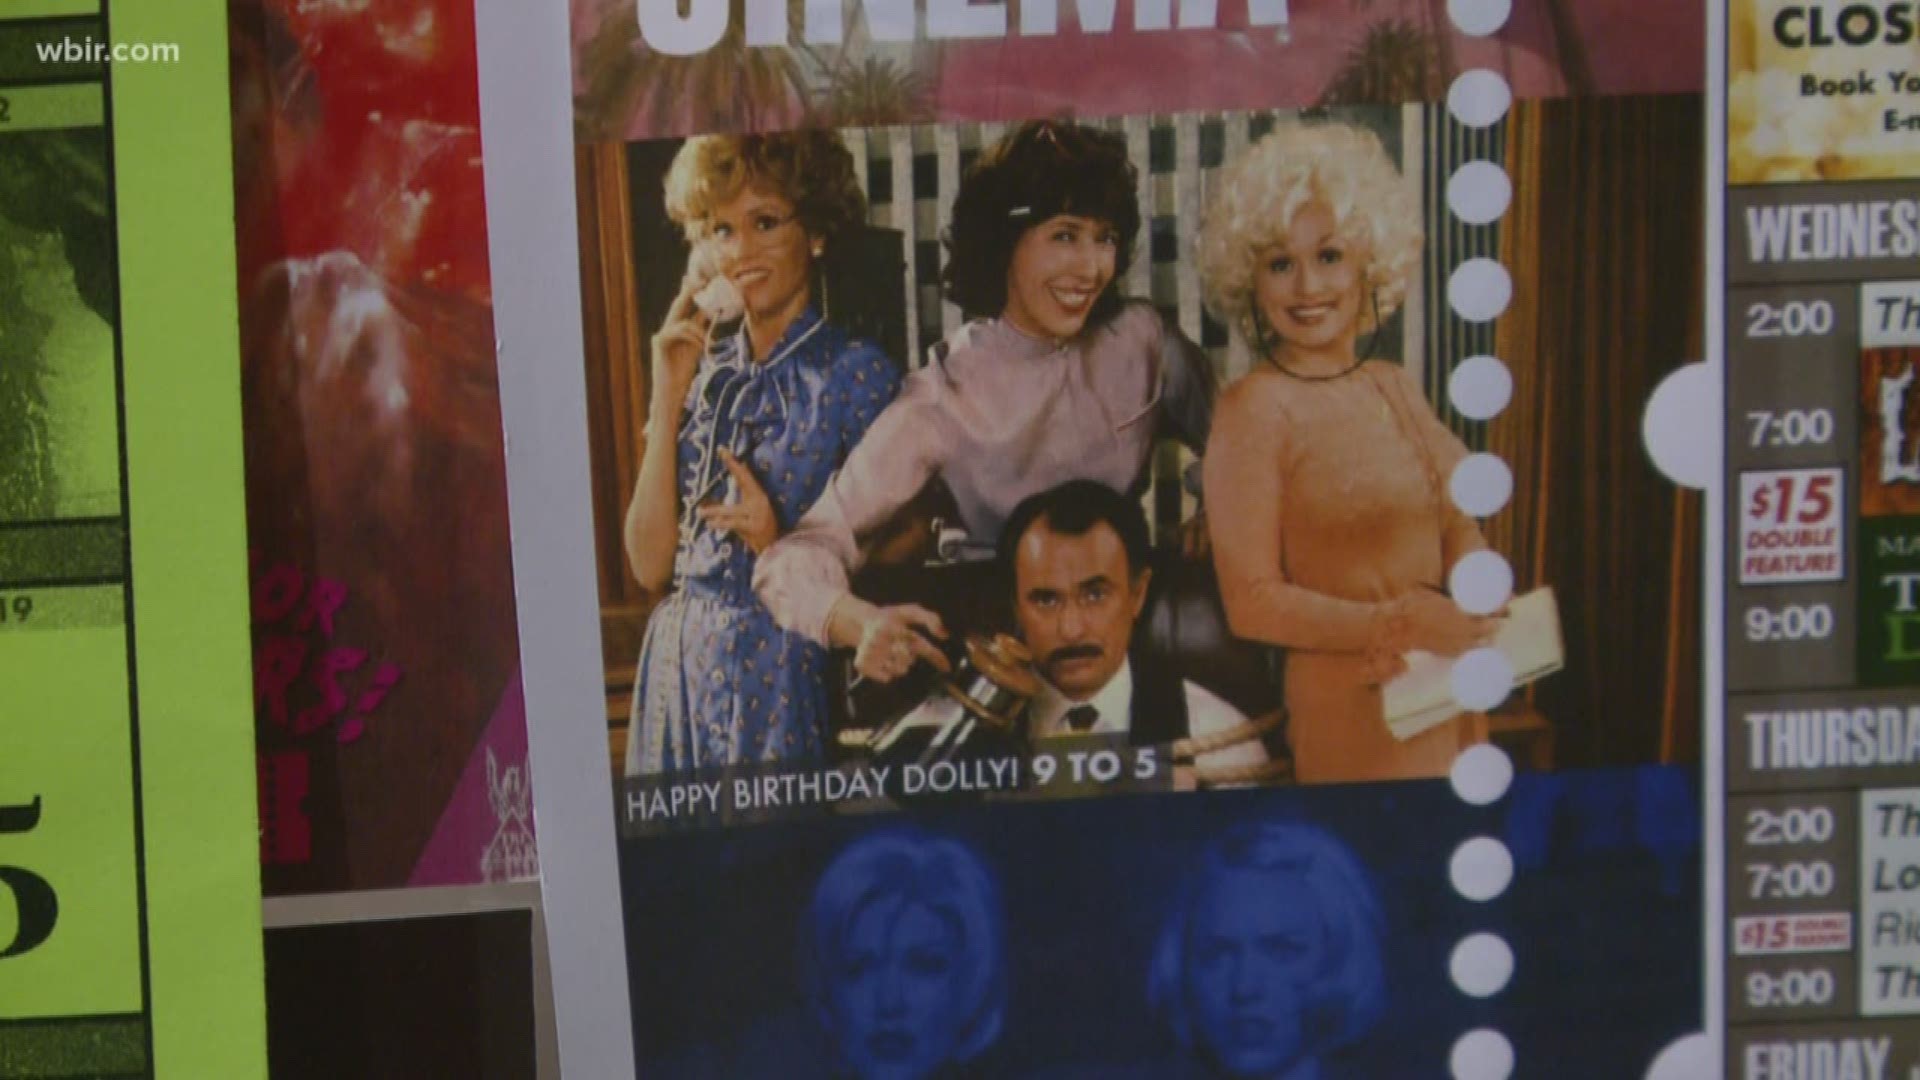 The cinema held a special screening of "Nine to Five" to celebrate the East Tennessee singer's national impact.